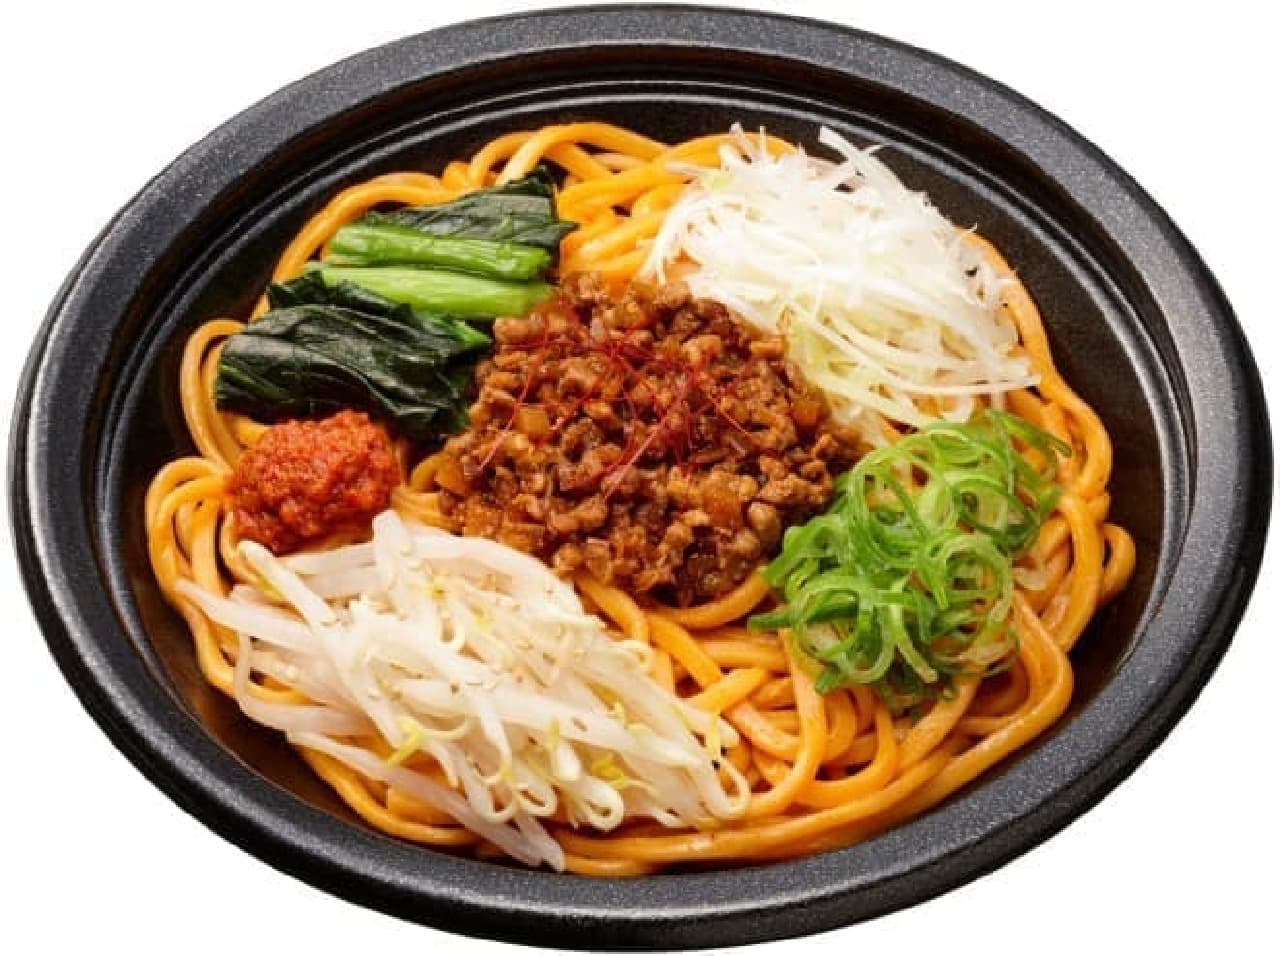 FamilyMart "Flame Red Dandan Noodles-Stir-fried Sichuan Pepper Oil and Chili Oil-"